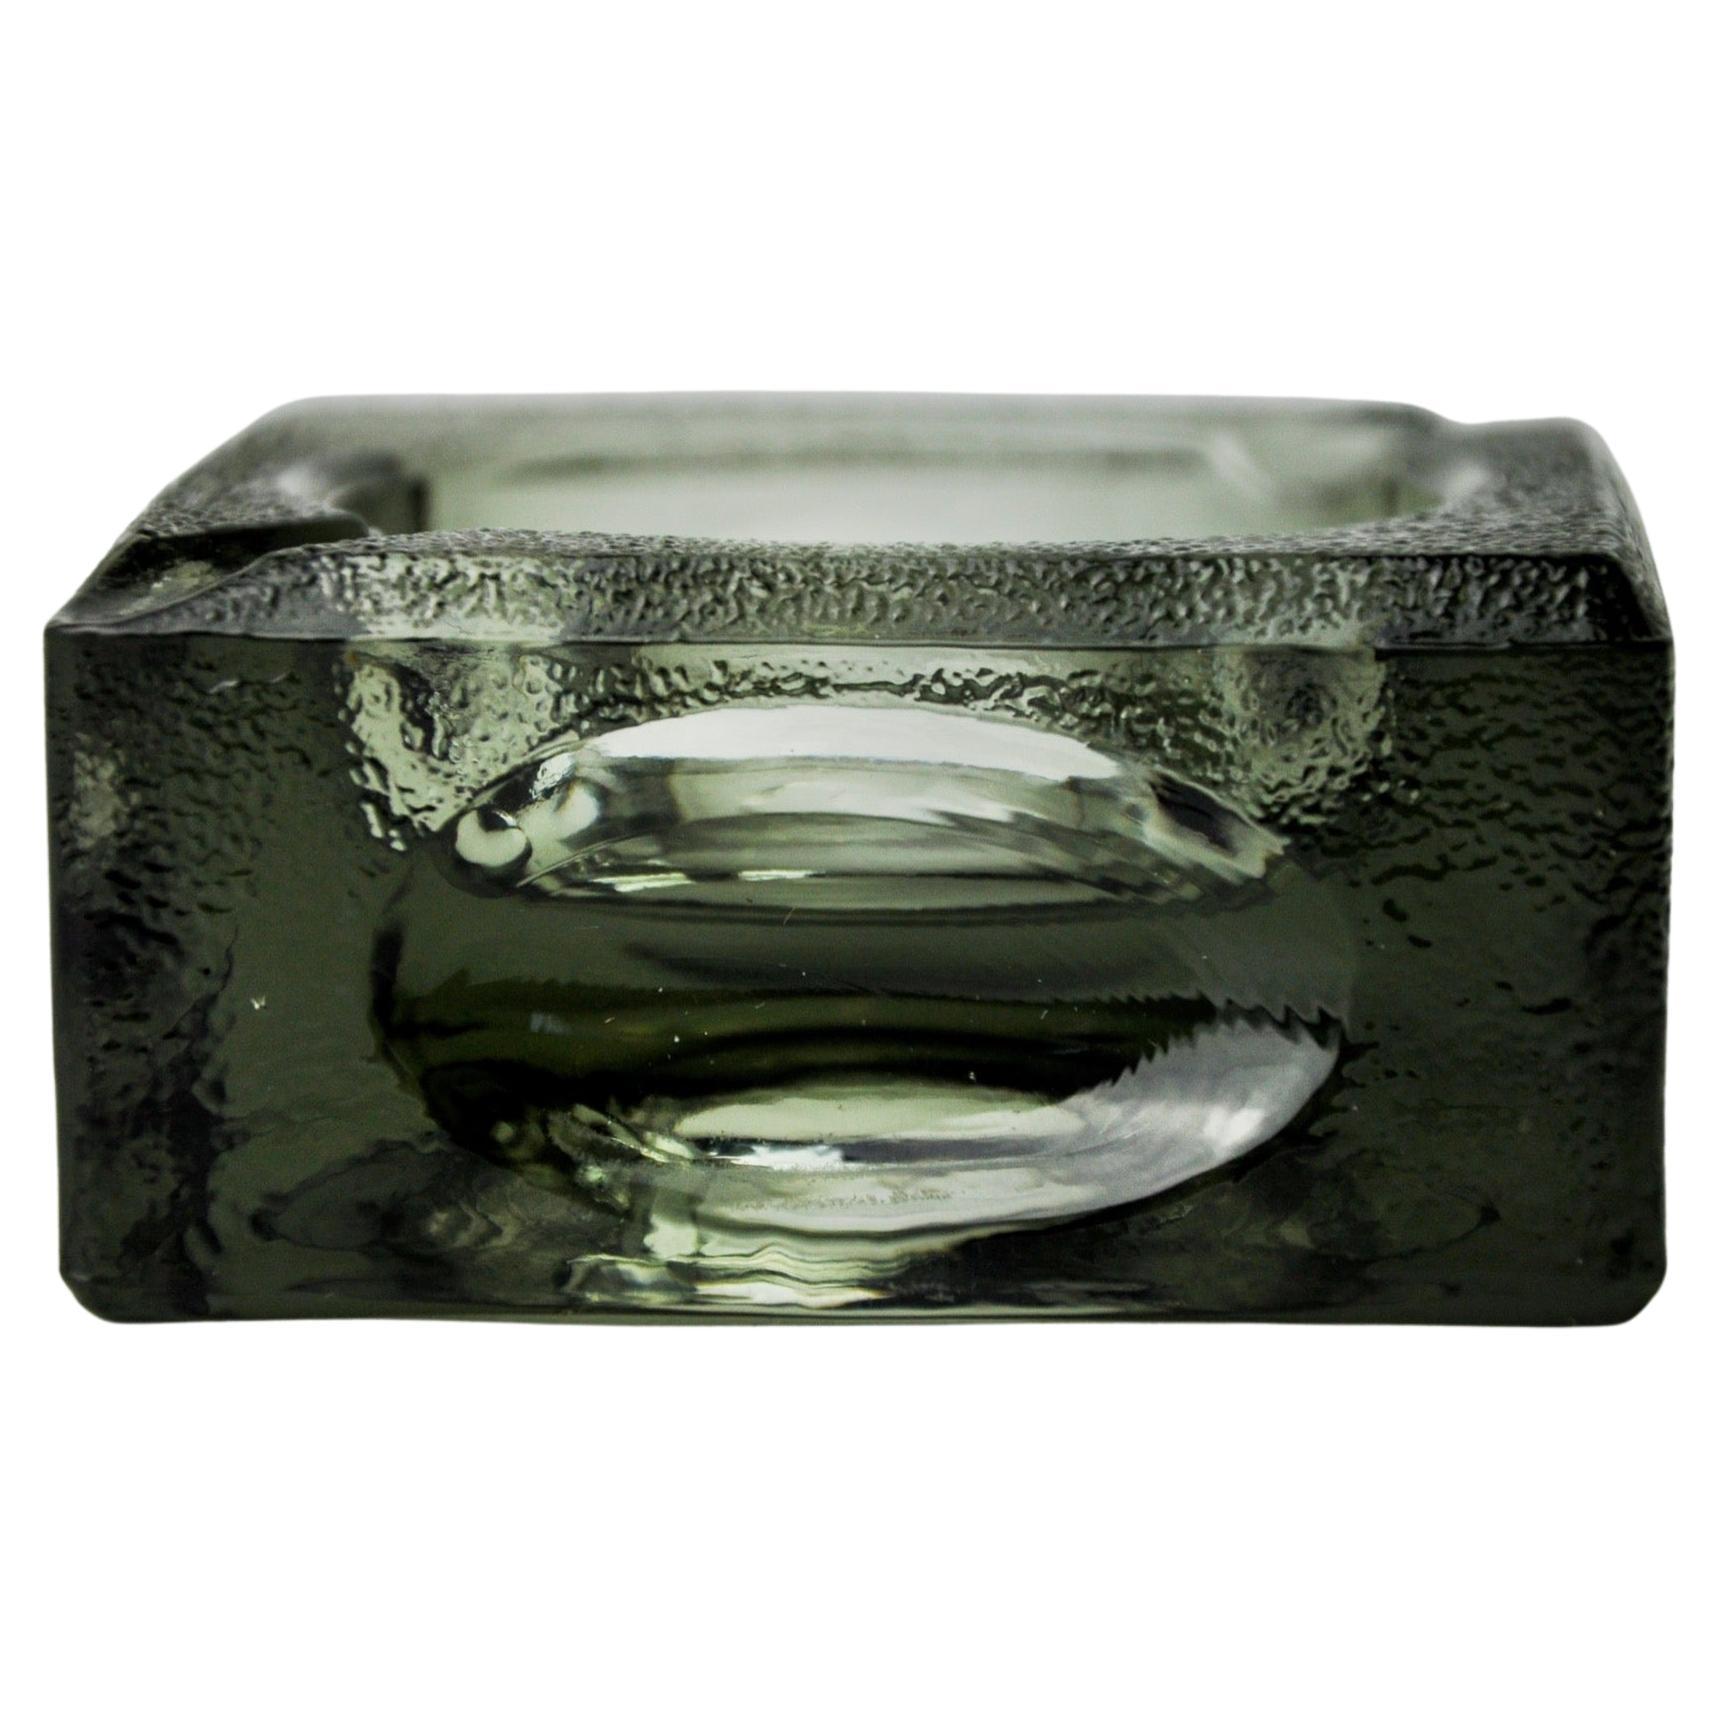 Black ashtray by Antonio Imperatore, frosted murano glass, Italy 1970